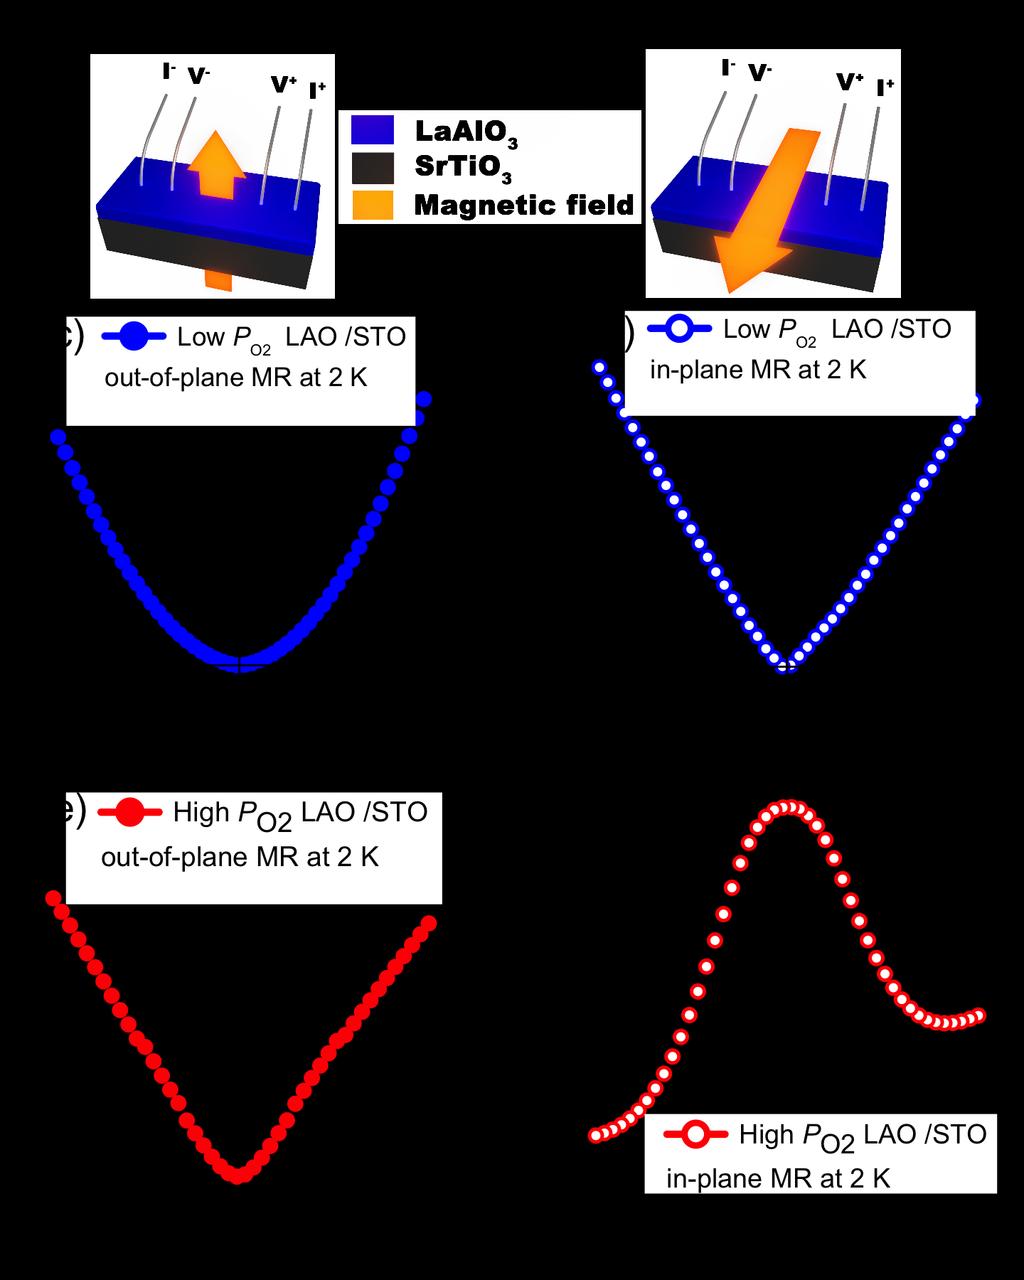 Figure 2: Comparison on magnetoresistance between high P O2 and low P O2 with magnetic field applied